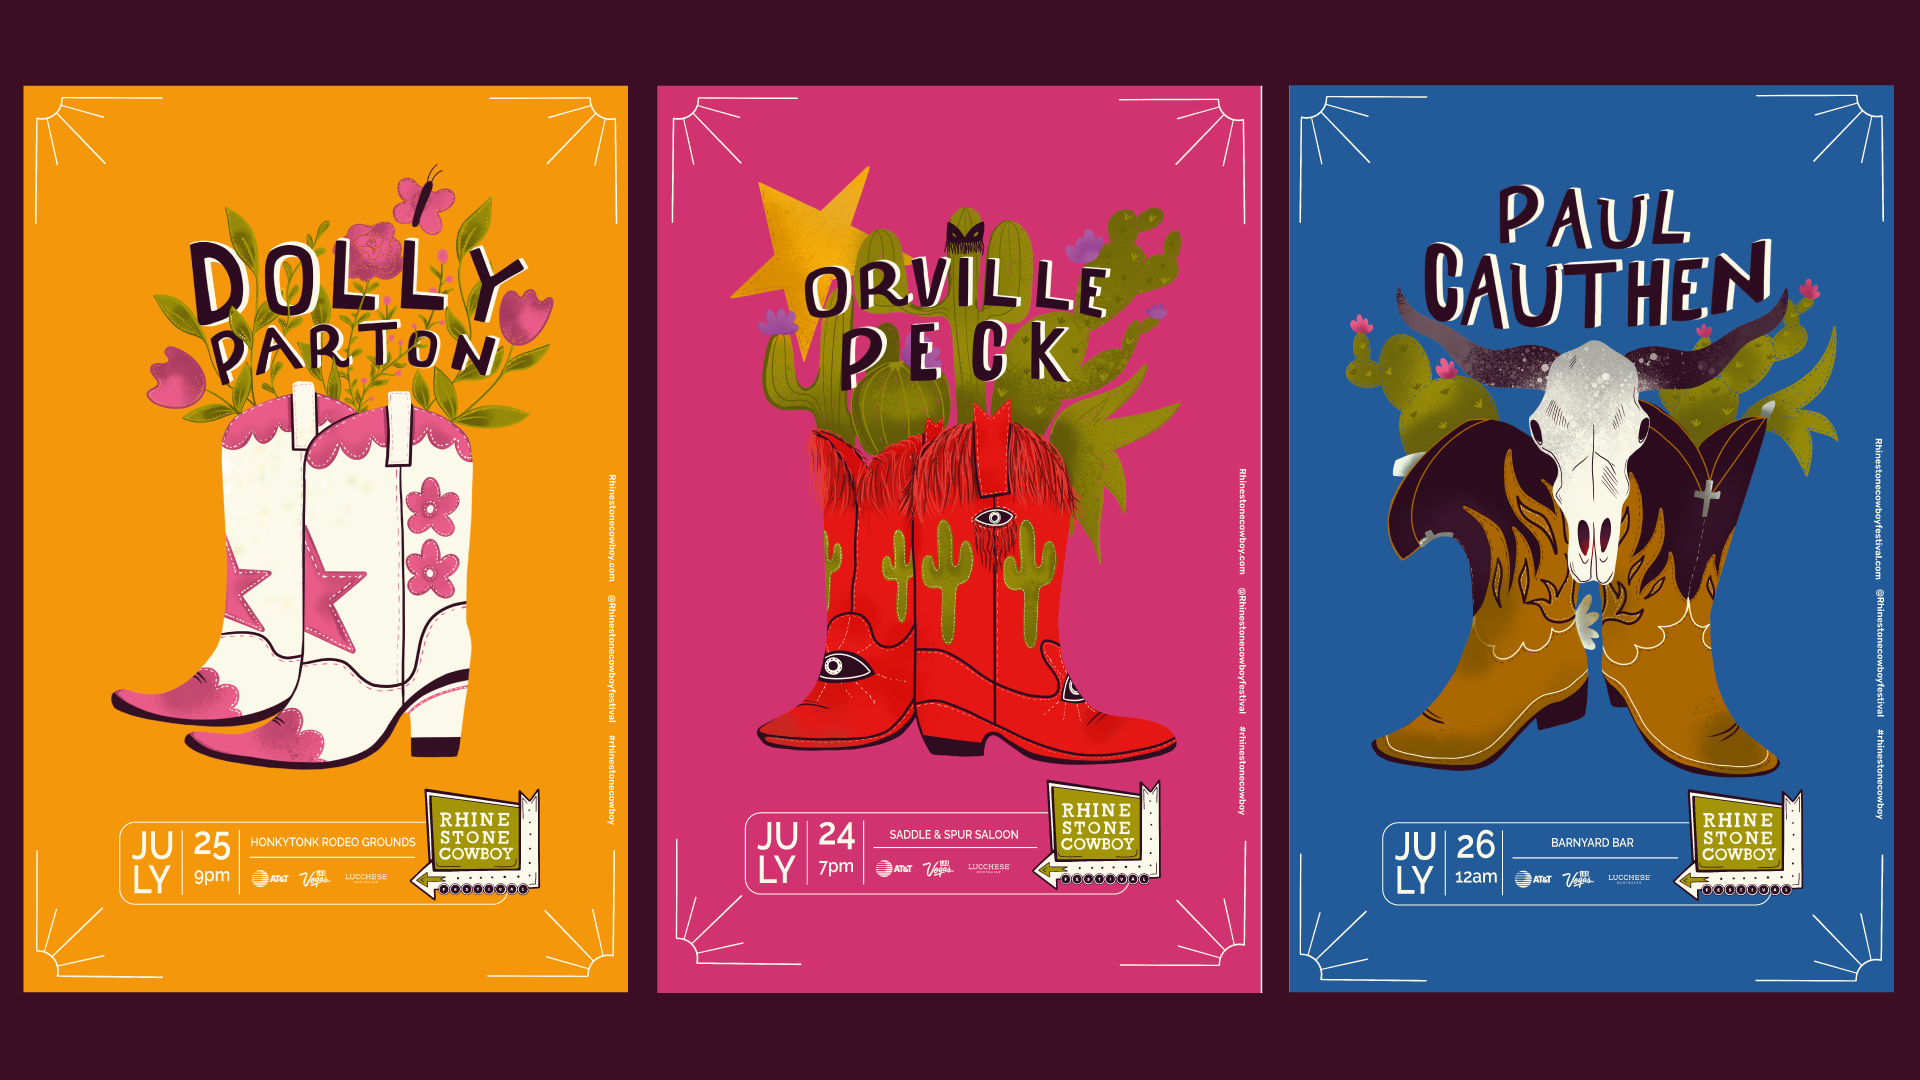 Three music festival posters showcasing the cowboy boots of three artists, Dolly Parton, Orville Peck & Paul Cauthen.